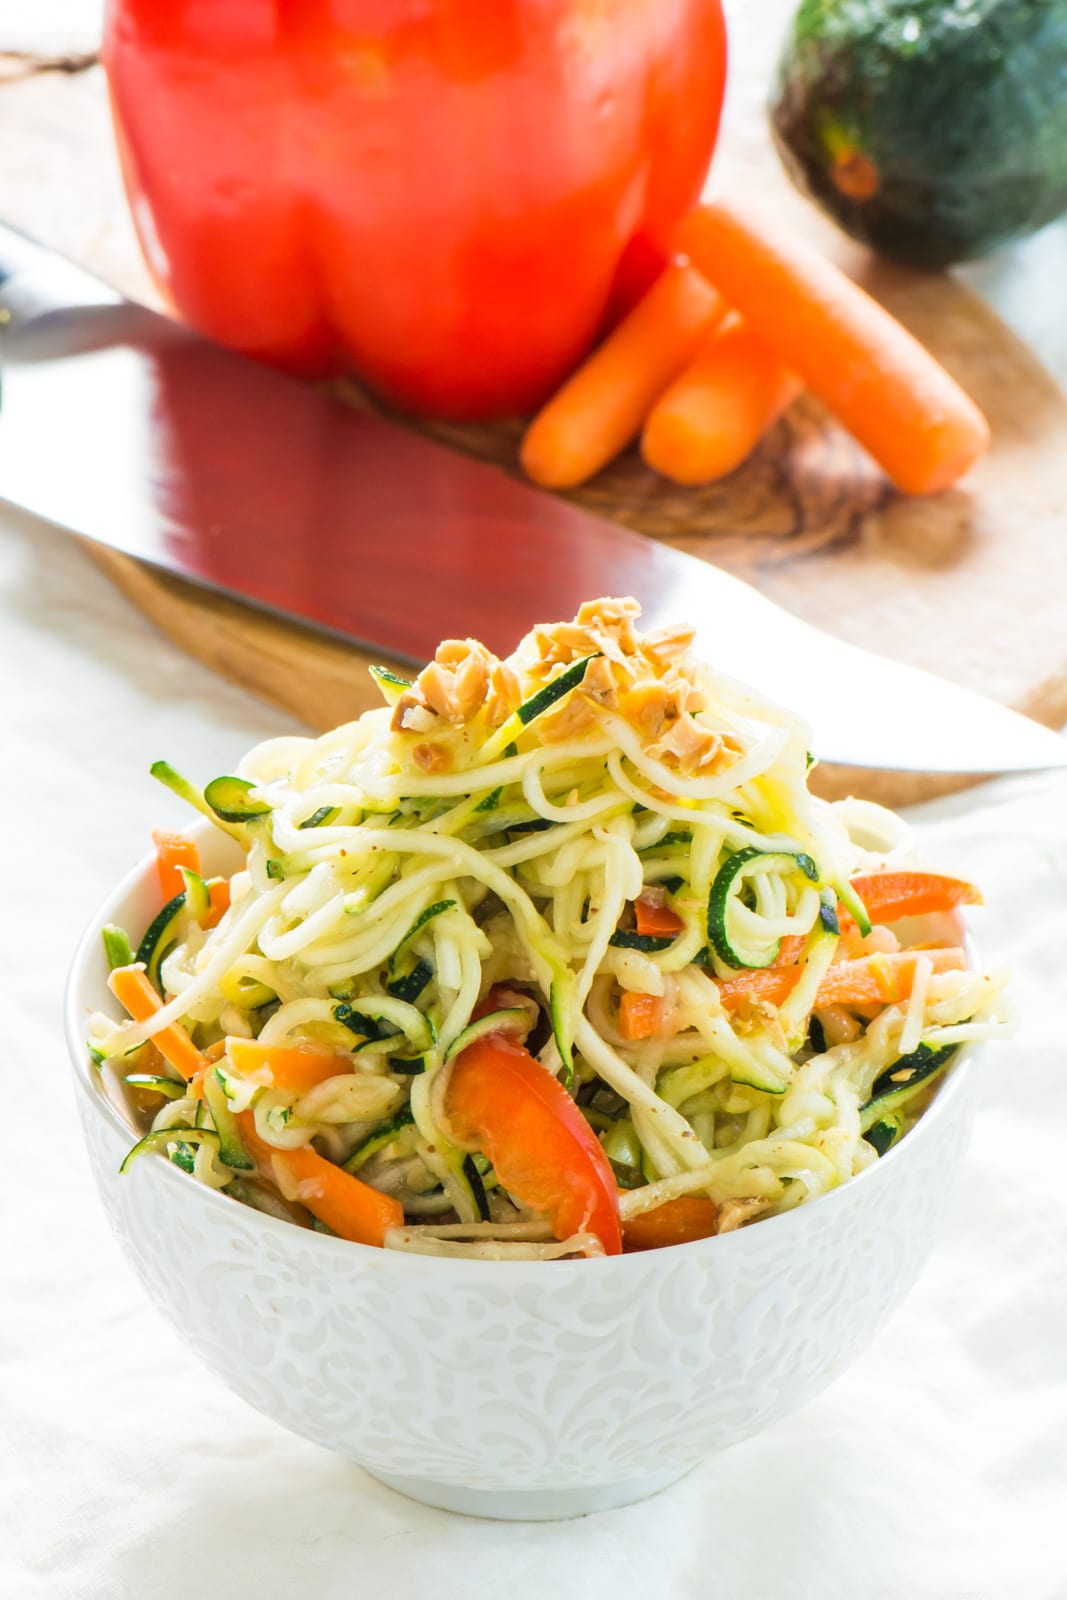 Pad Thai Zucchini Noodles are in a bowl with chopped peanuts on top. There's a cutting board in the background with a knife, carrots, a red bell pepper, and a zucchini.